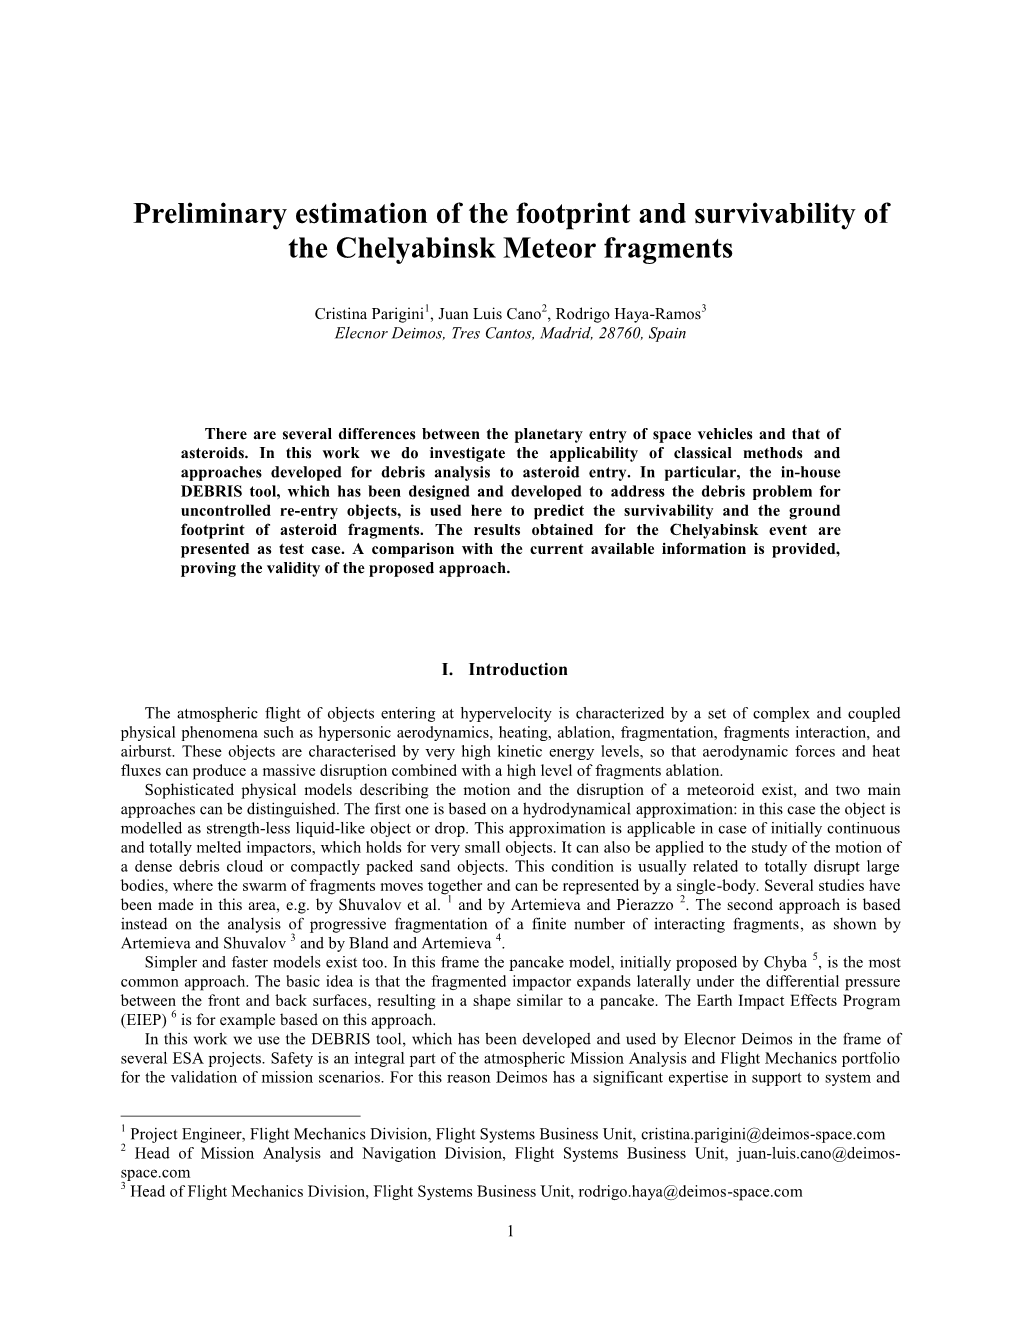 Preliminary Estimation of the Footprint and Survivability of the Chelyabinsk Meteor Fragments